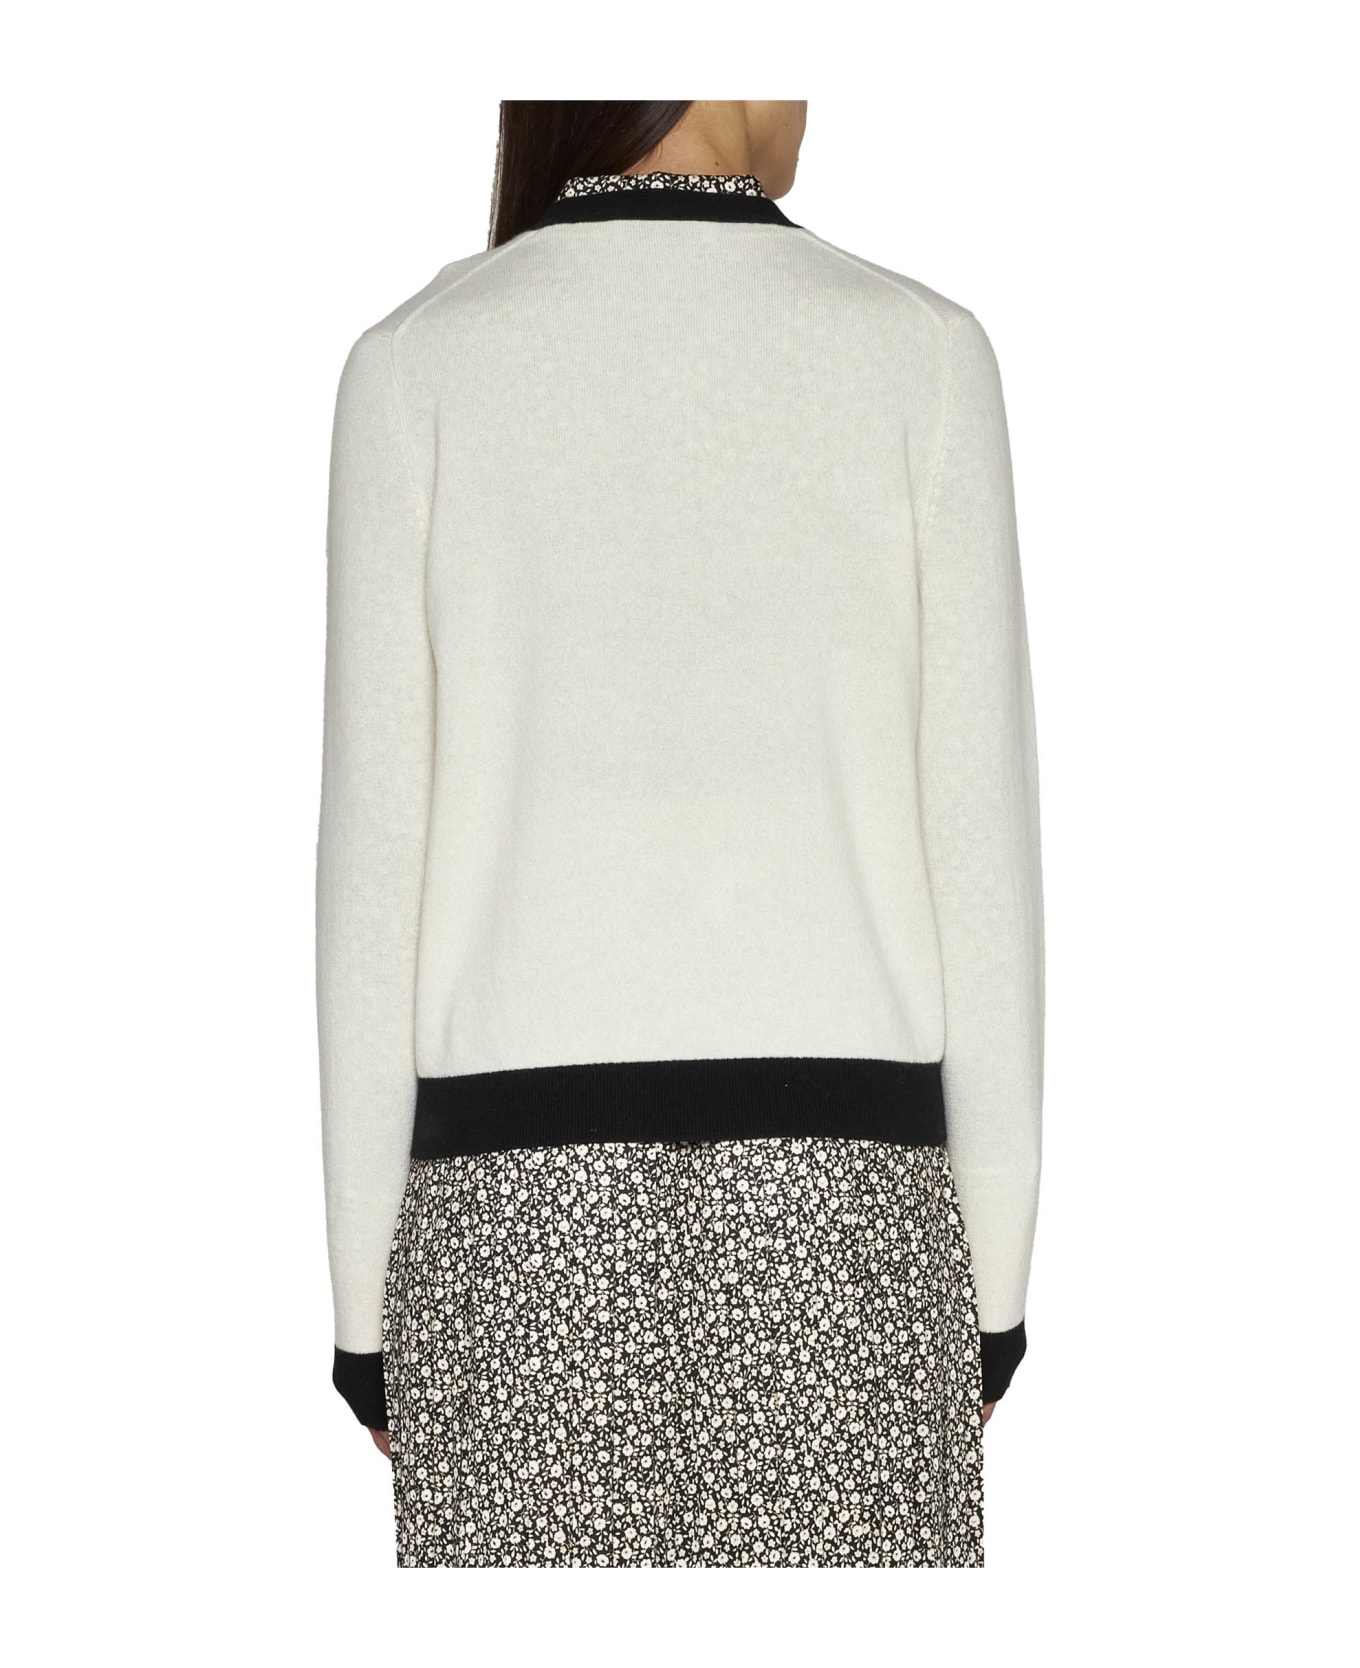 Tory Burch Cardigan With Contrasting Finish - Soft ivory black カーディガン